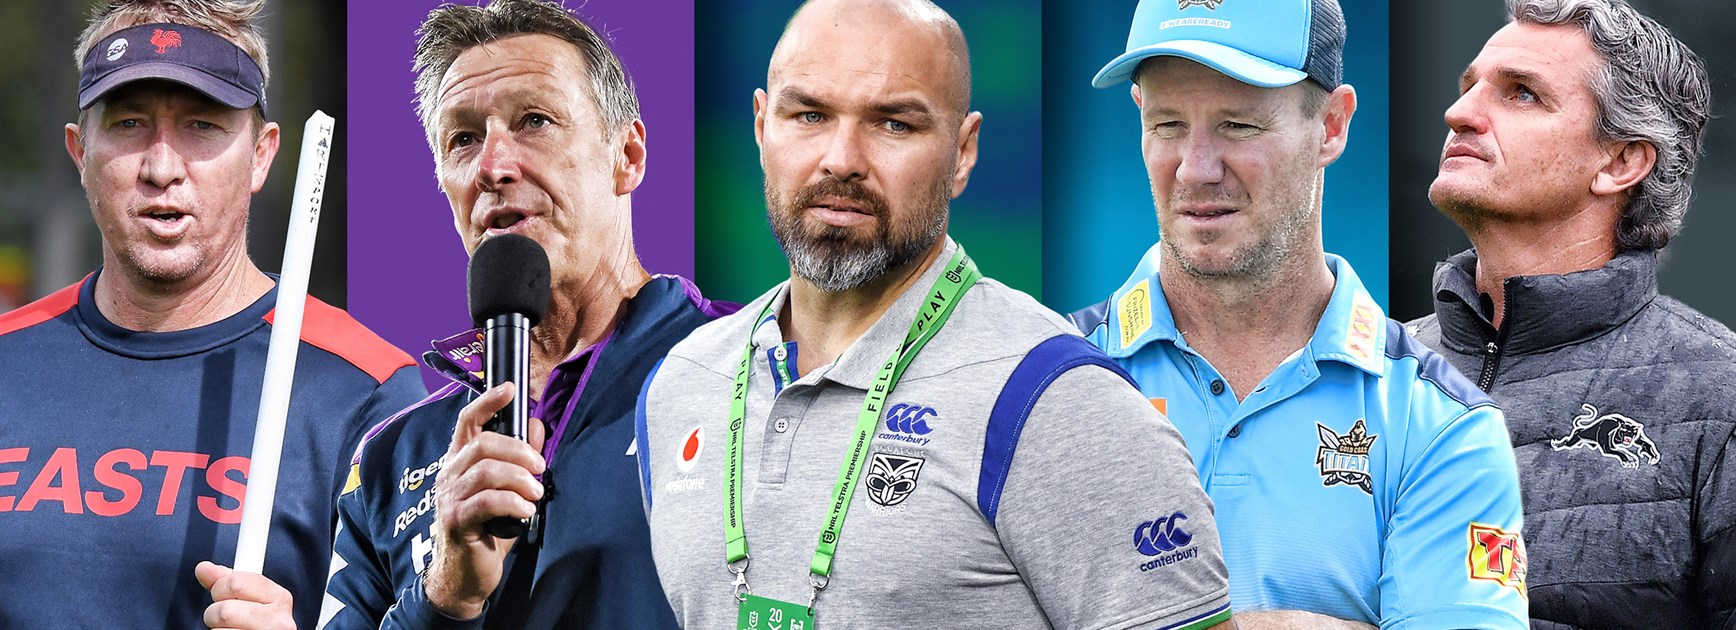 Experts' view: Who's coach of the year?